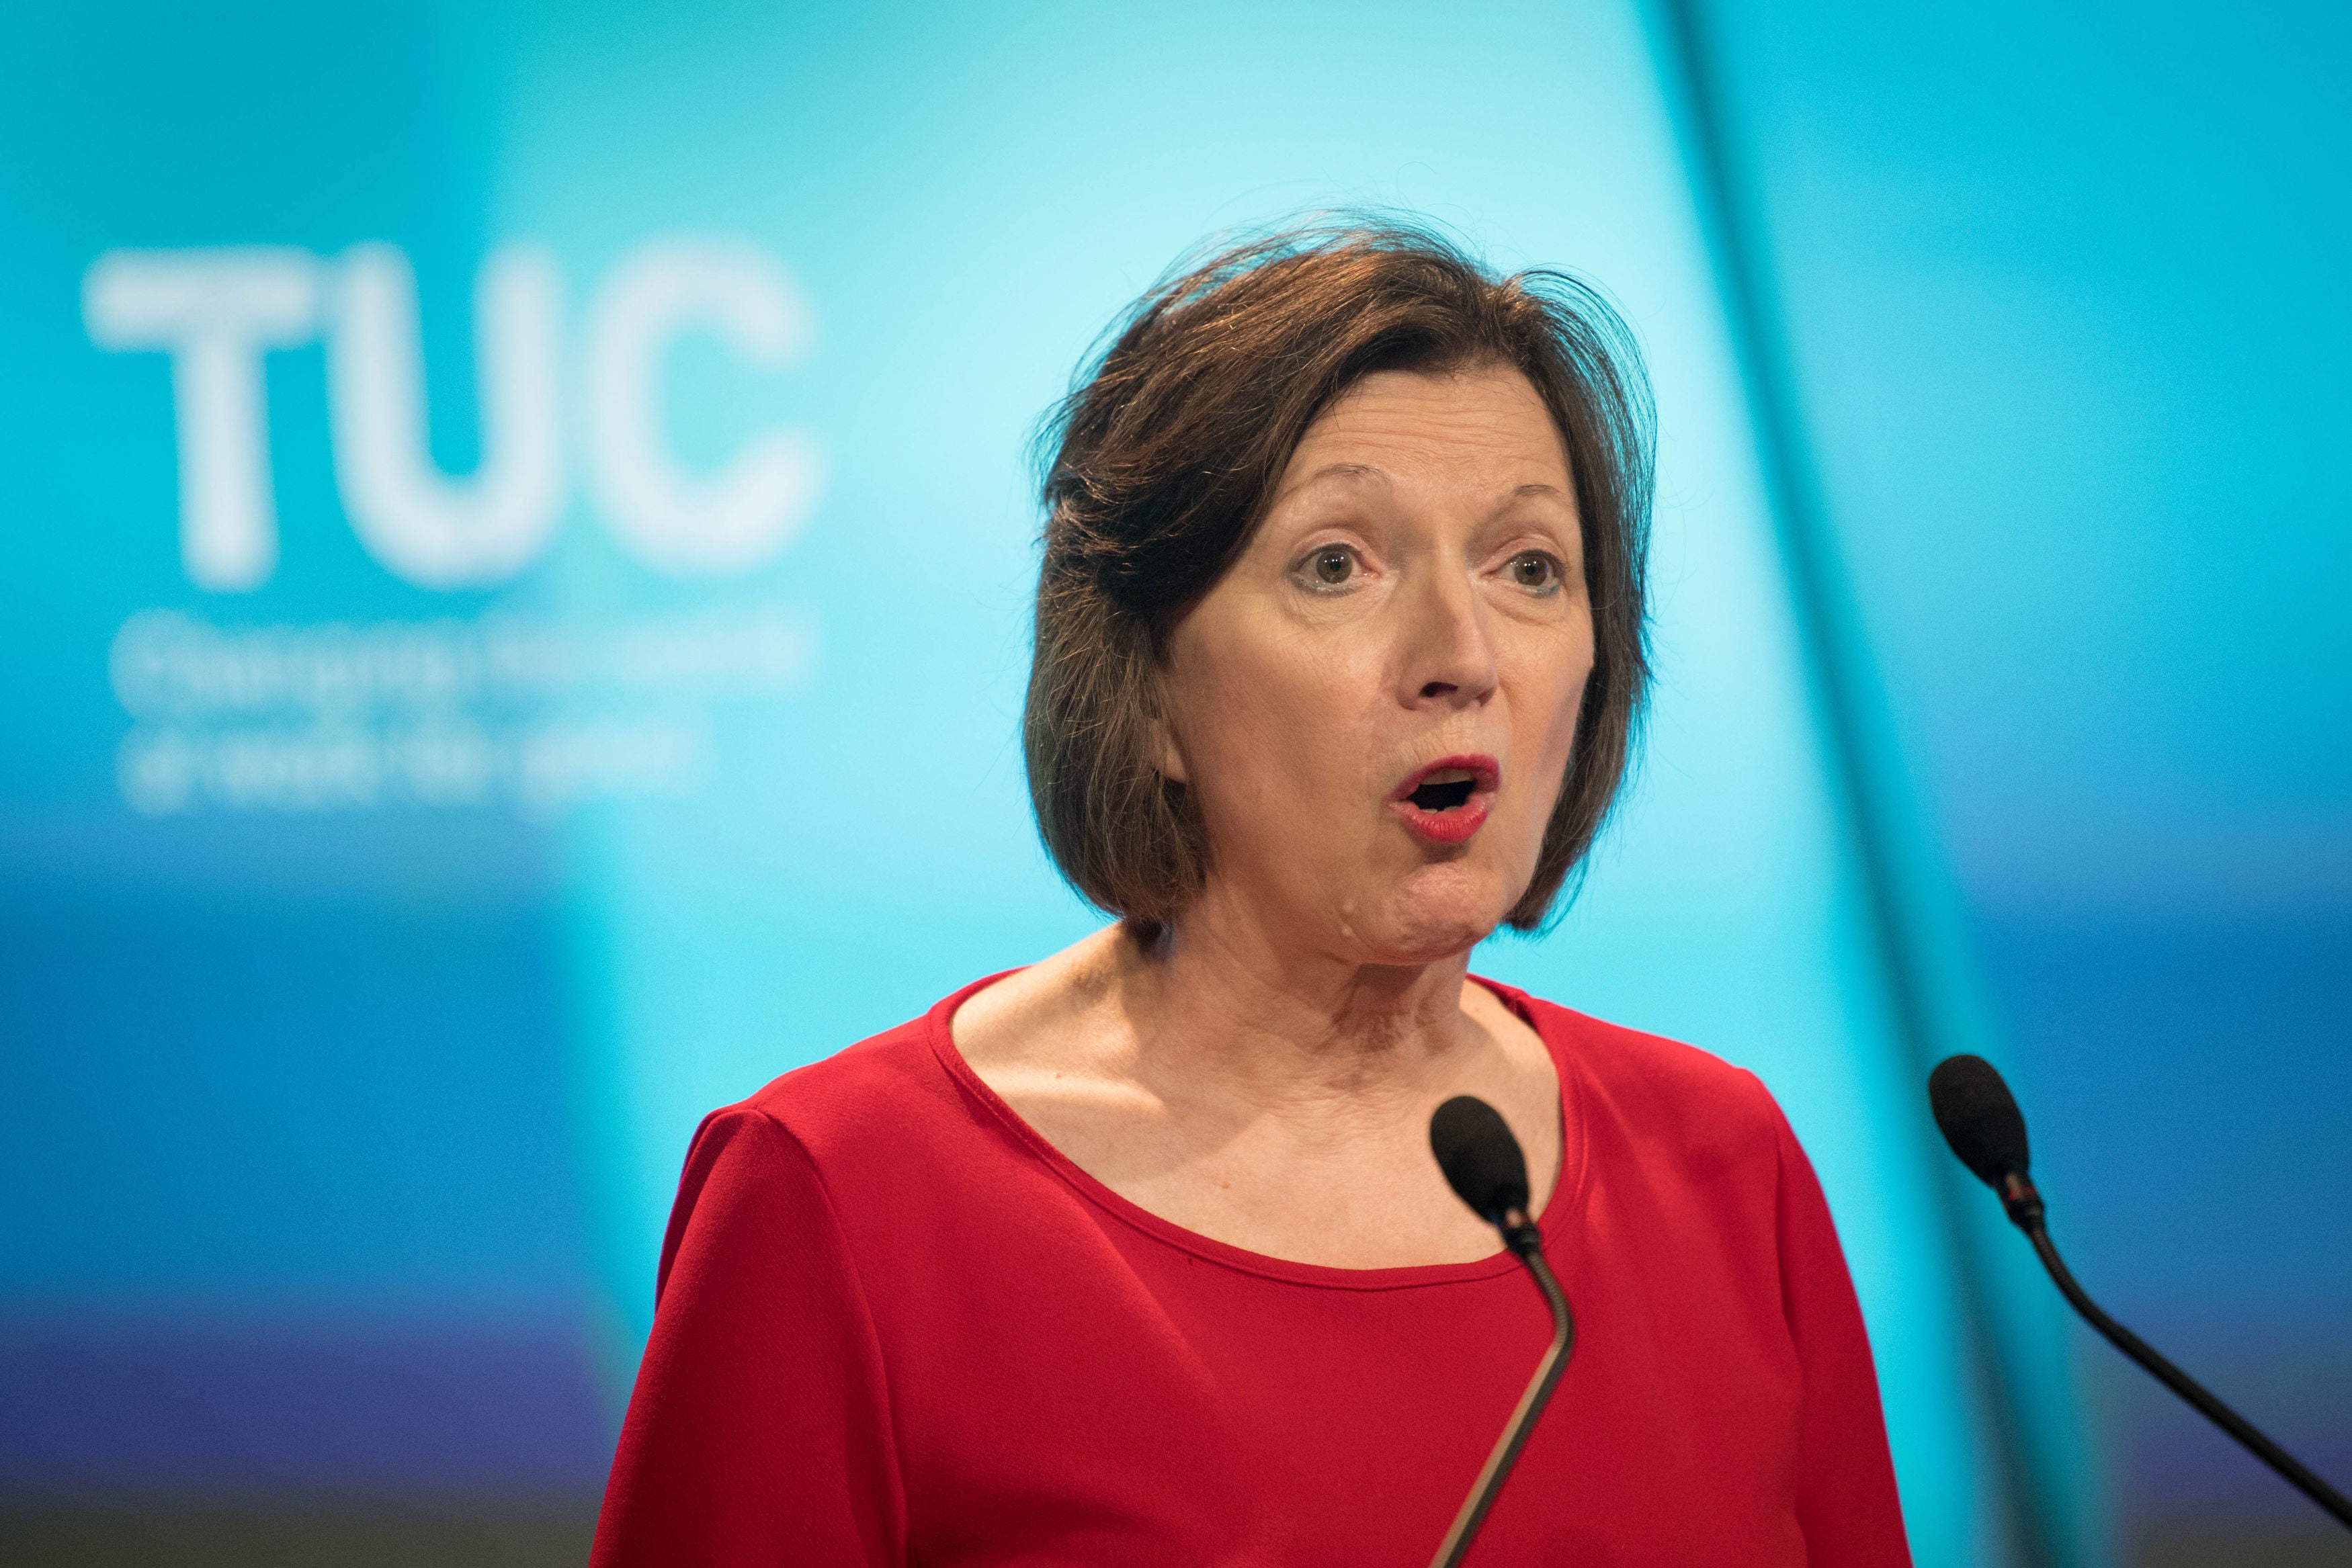 General secretary of TUC Frances O'Grady has warned the prime minister not to ‘gamble’ on public safety